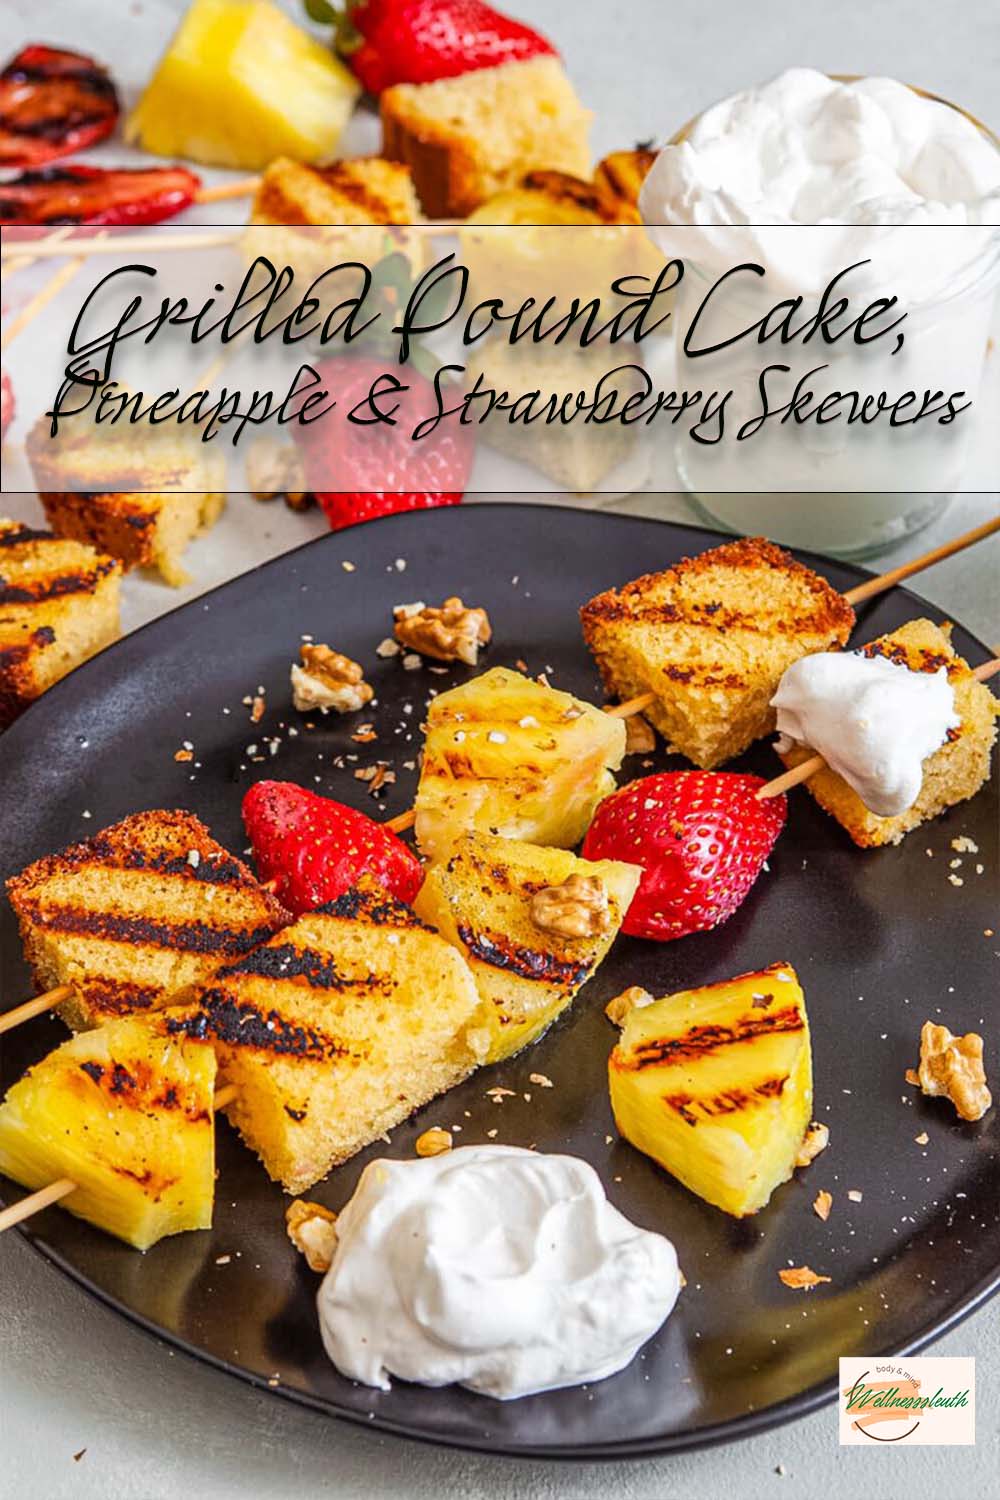 Grilled Pound Cake, Pineapple & Strawberry Skewers